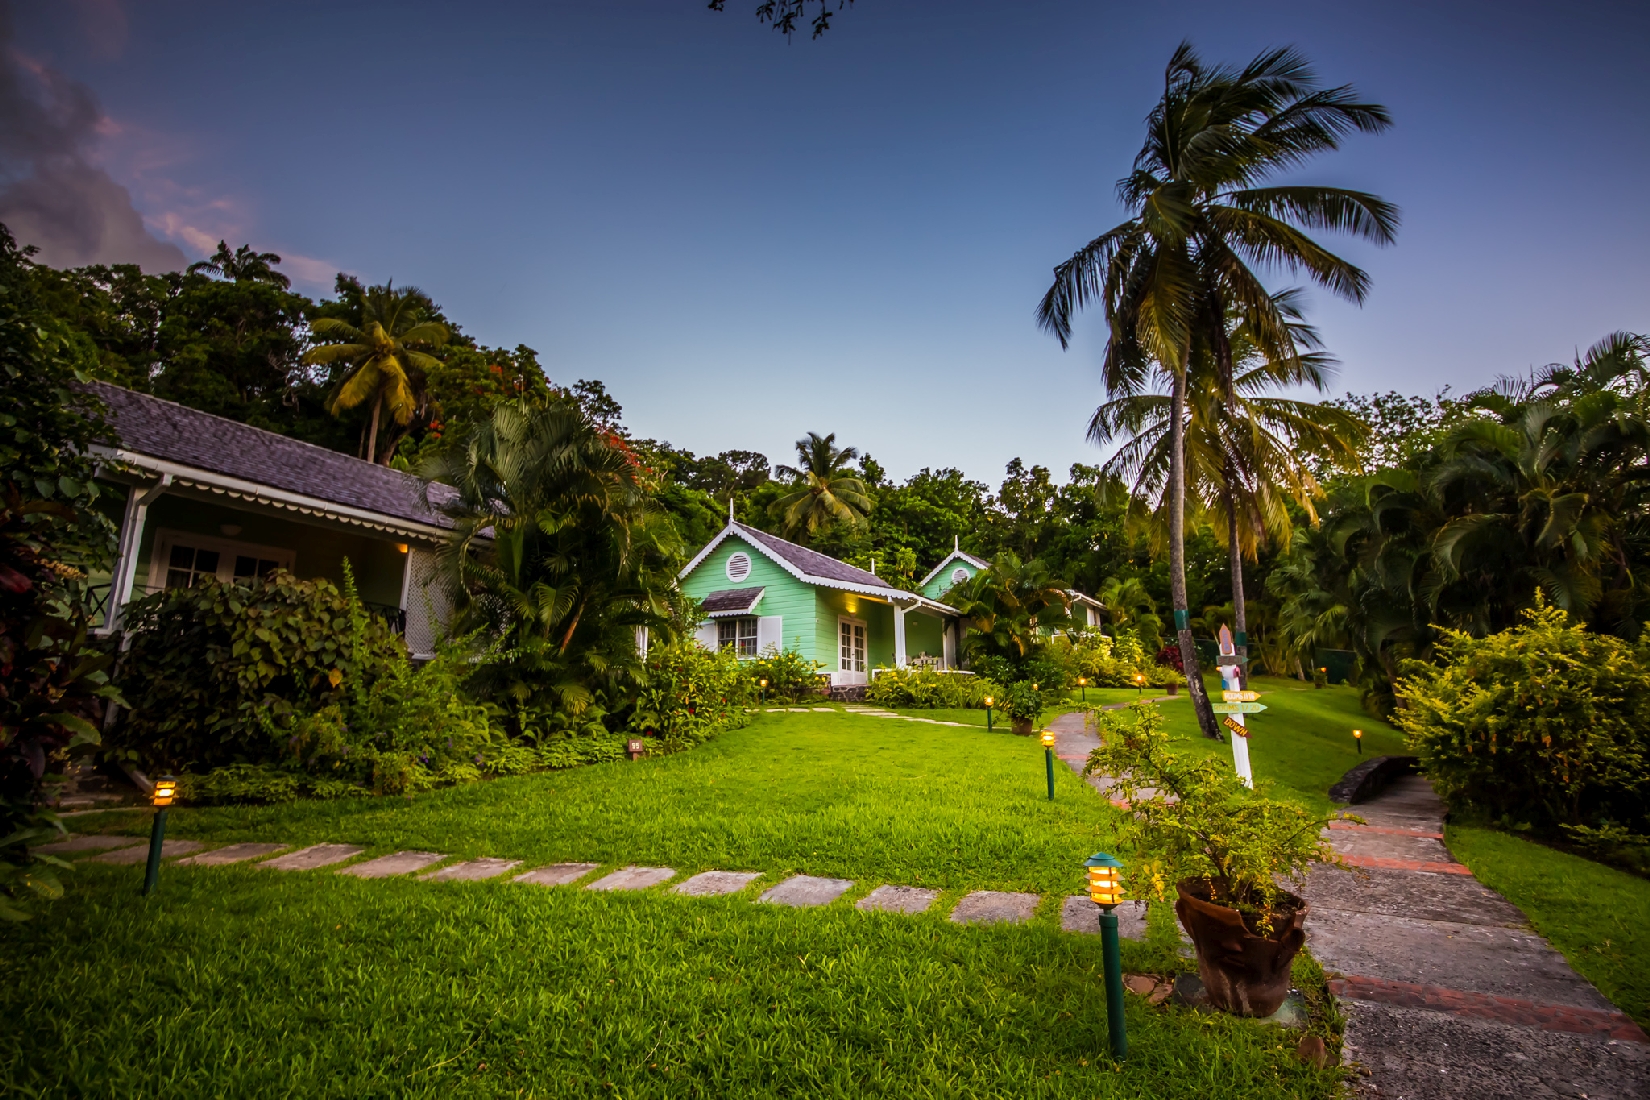 The garden setting of deluxe cottages in East Winds, St Lucia